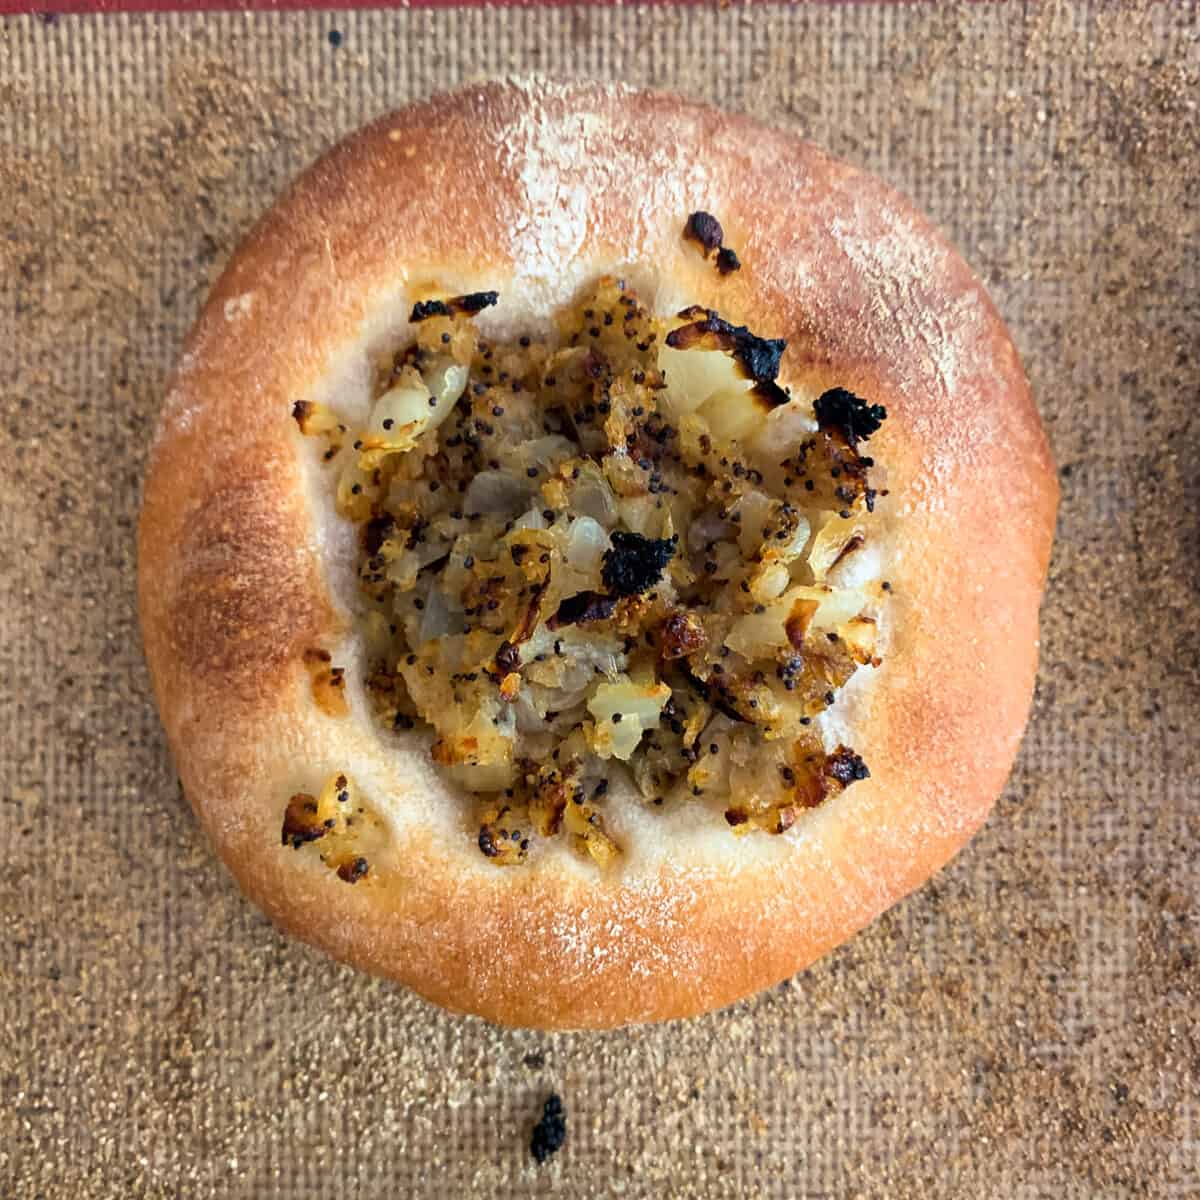 How Many Calories in a Bialy? 